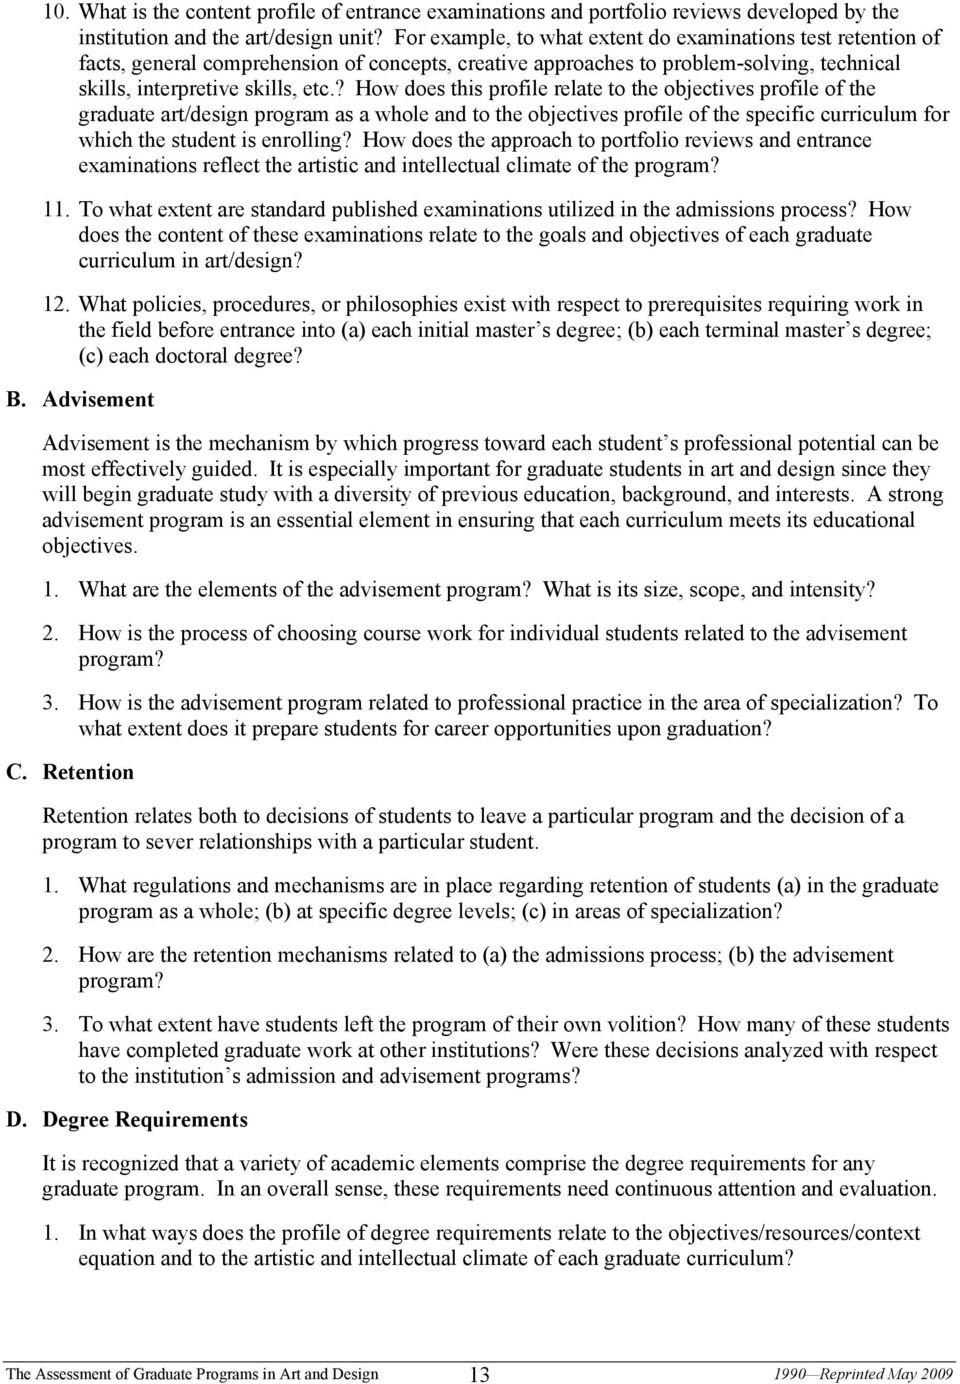 ? How does this profile relate to the objectives profile of the graduate art/design program as a whole and to the objectives profile of the specific curriculum for which the student is enrolling?